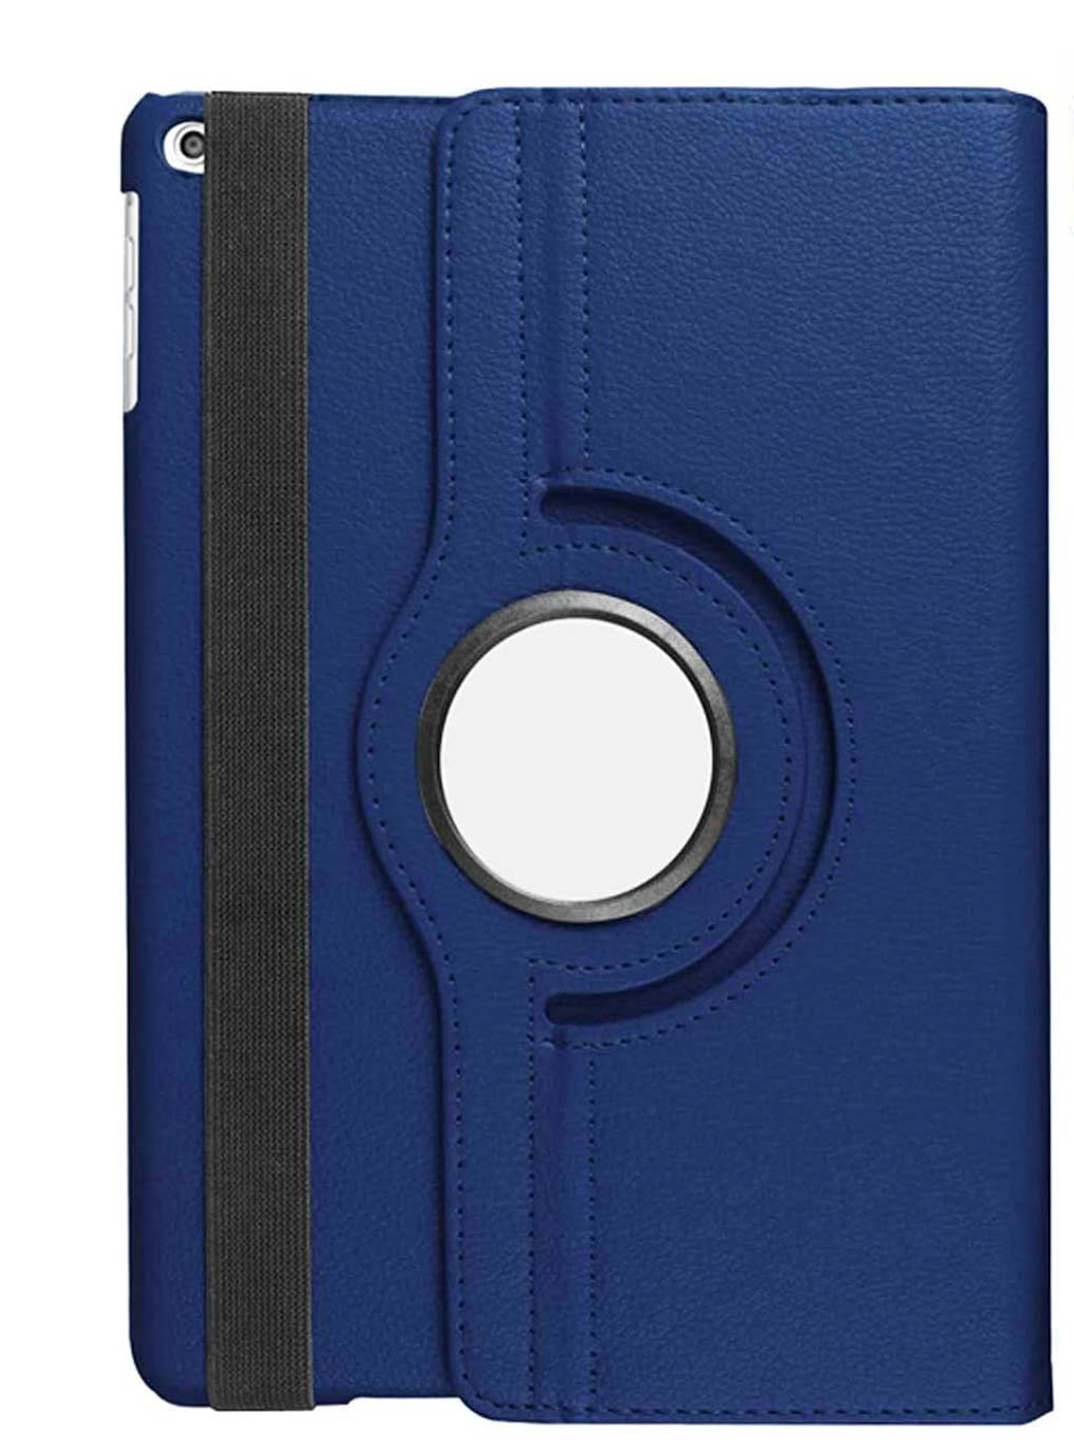 Kickstand Book Case for iPad Mini 5/4 Gen 7.9 inch (NAVY BLUE) *Free Shipping*